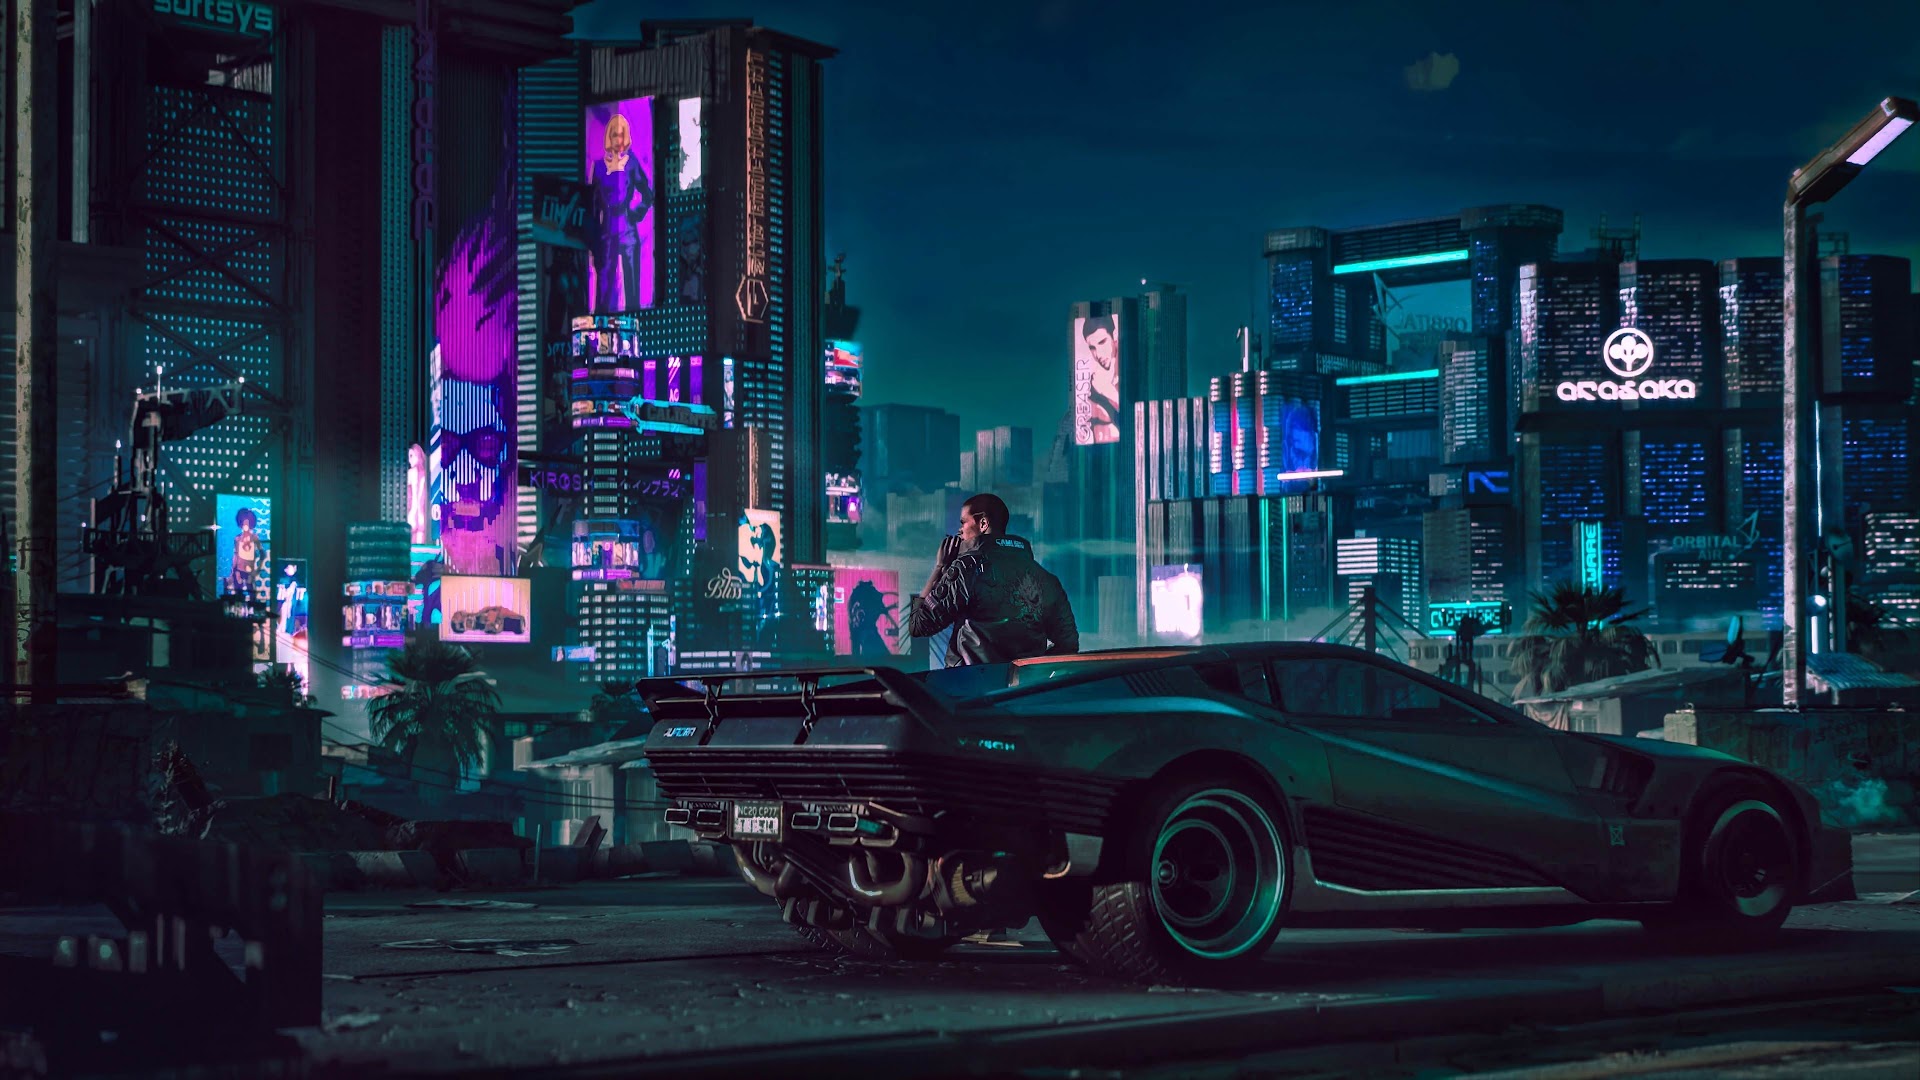 Night City Revisited - Cyberpunk 2077 [4K]. : r/wallpapers